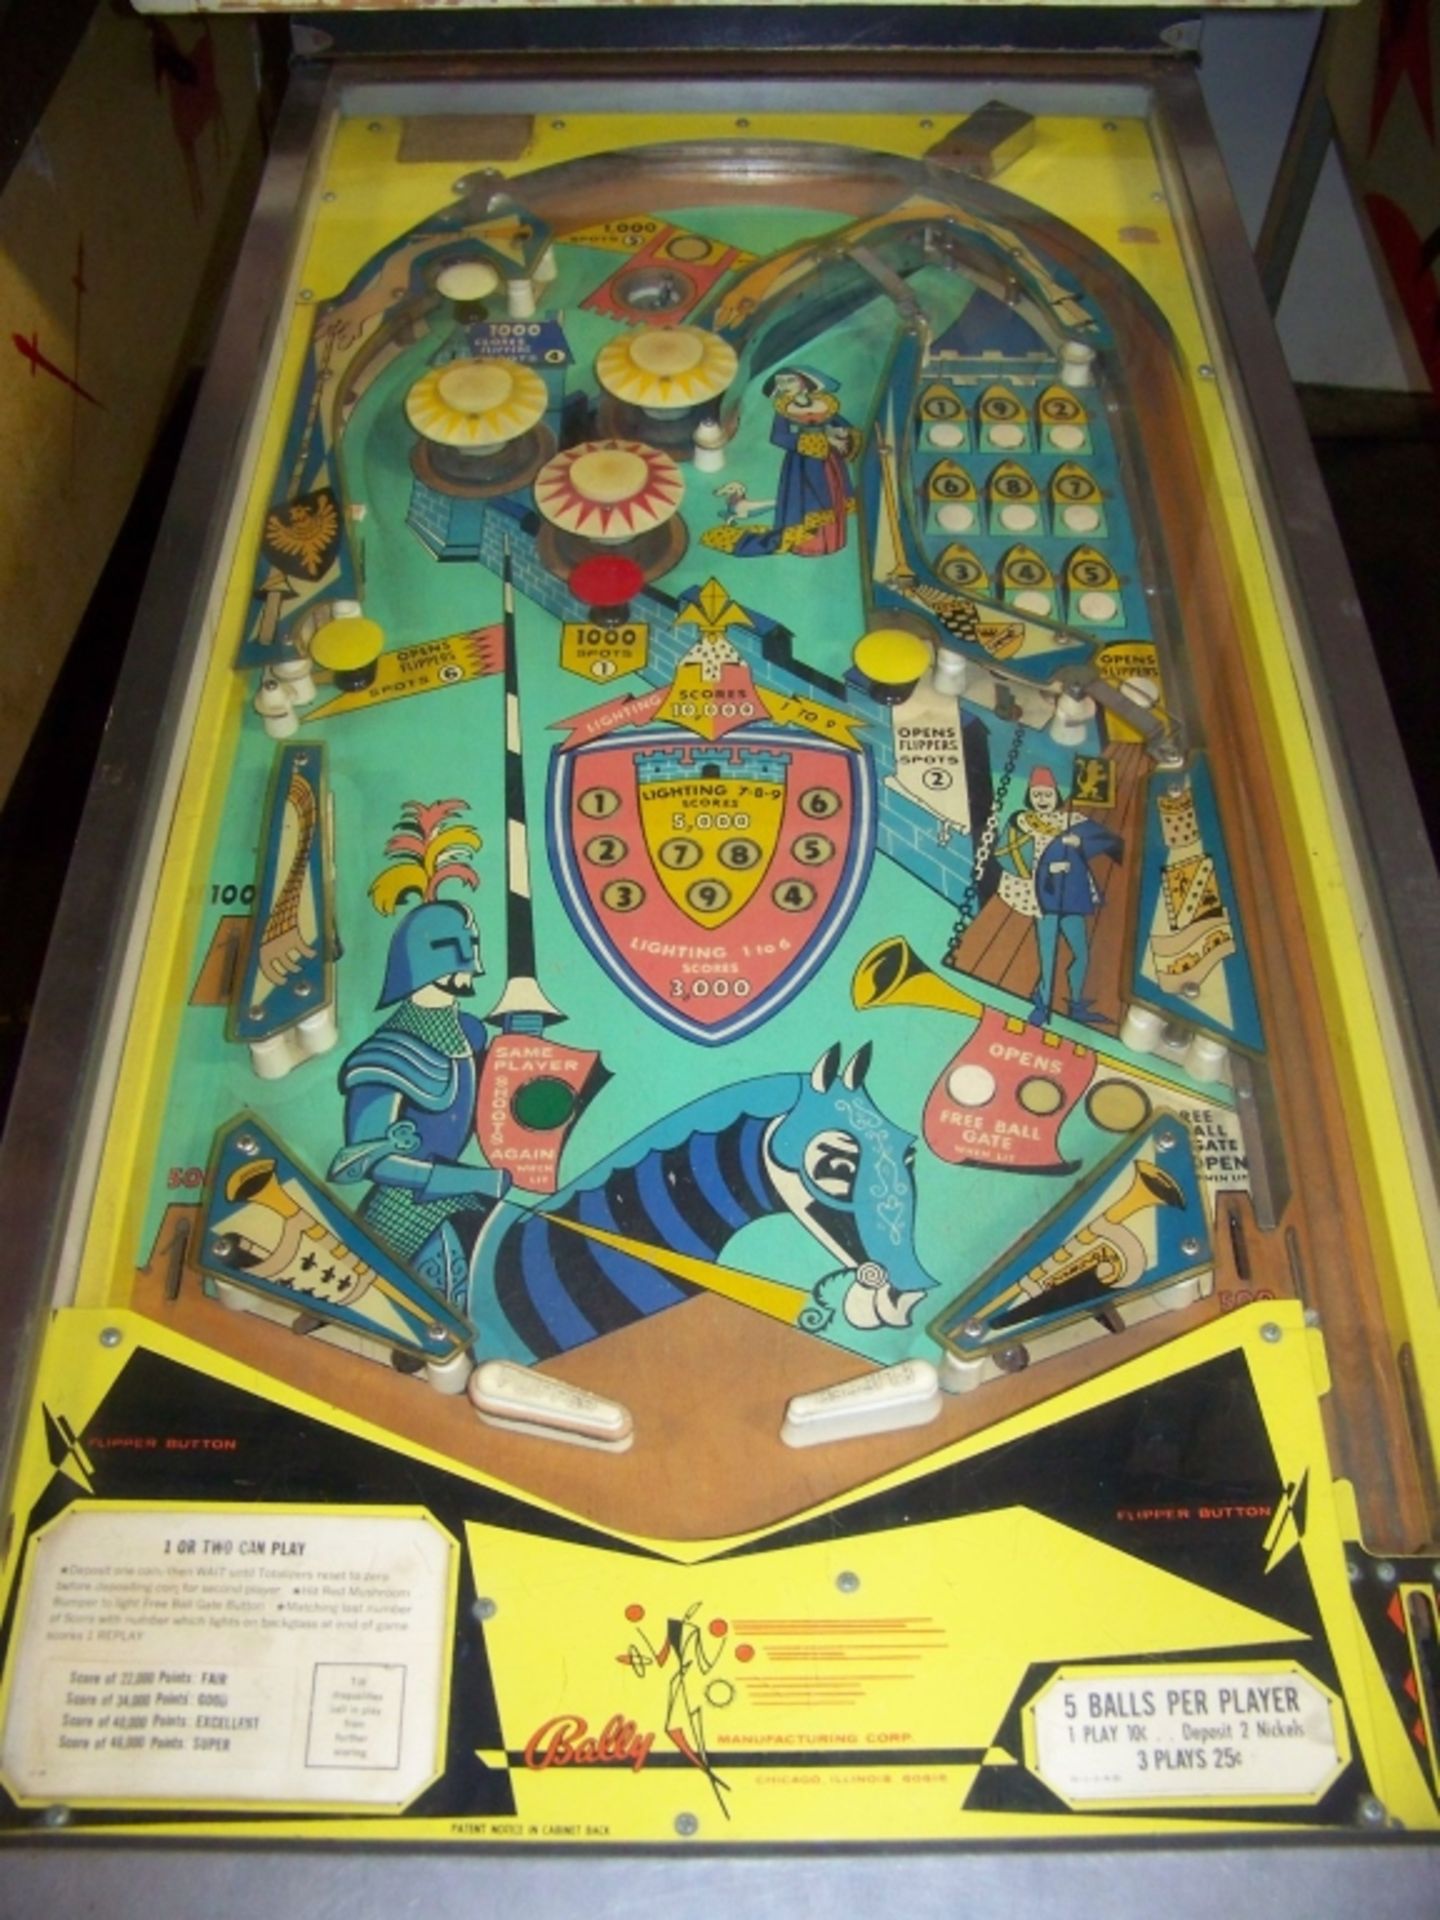 JOUST CLASSIC PINBALL MACHINE BALLY 1969 Item is in used condition. Evidence of wear and - Image 3 of 6